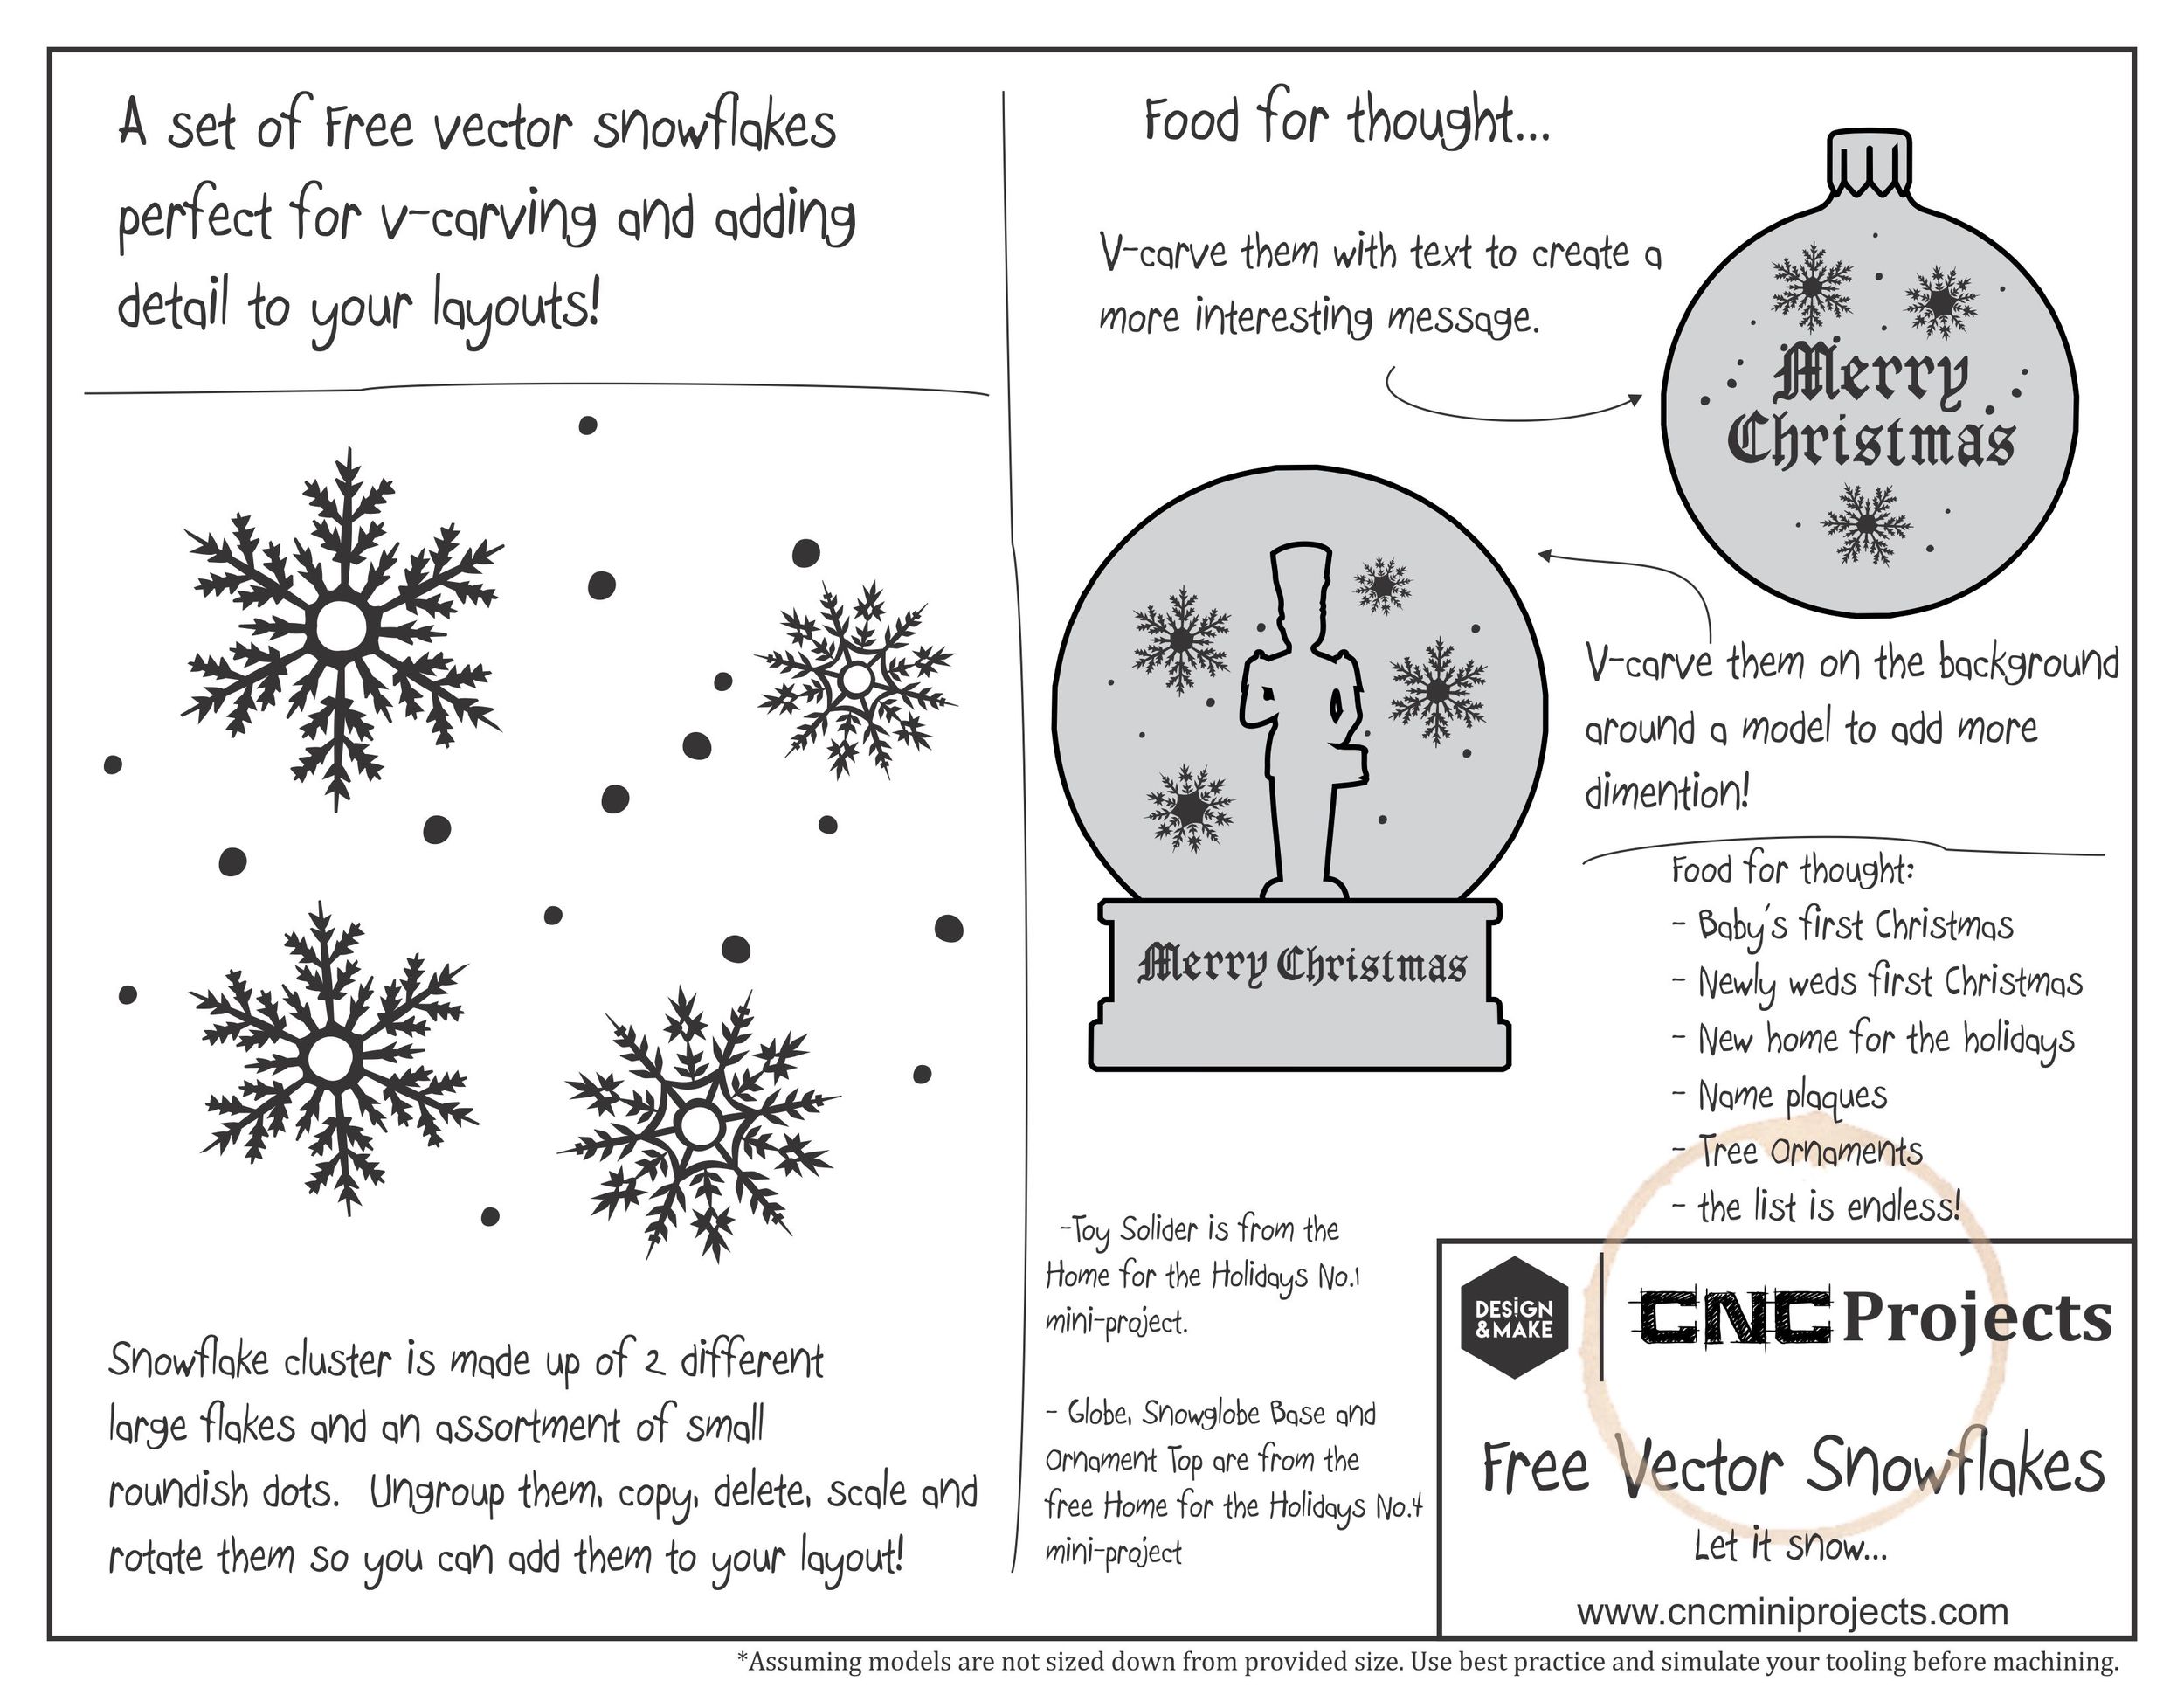 Project Page - Home for the Holidays No.4 - Free Snowflake Vectors.jpg